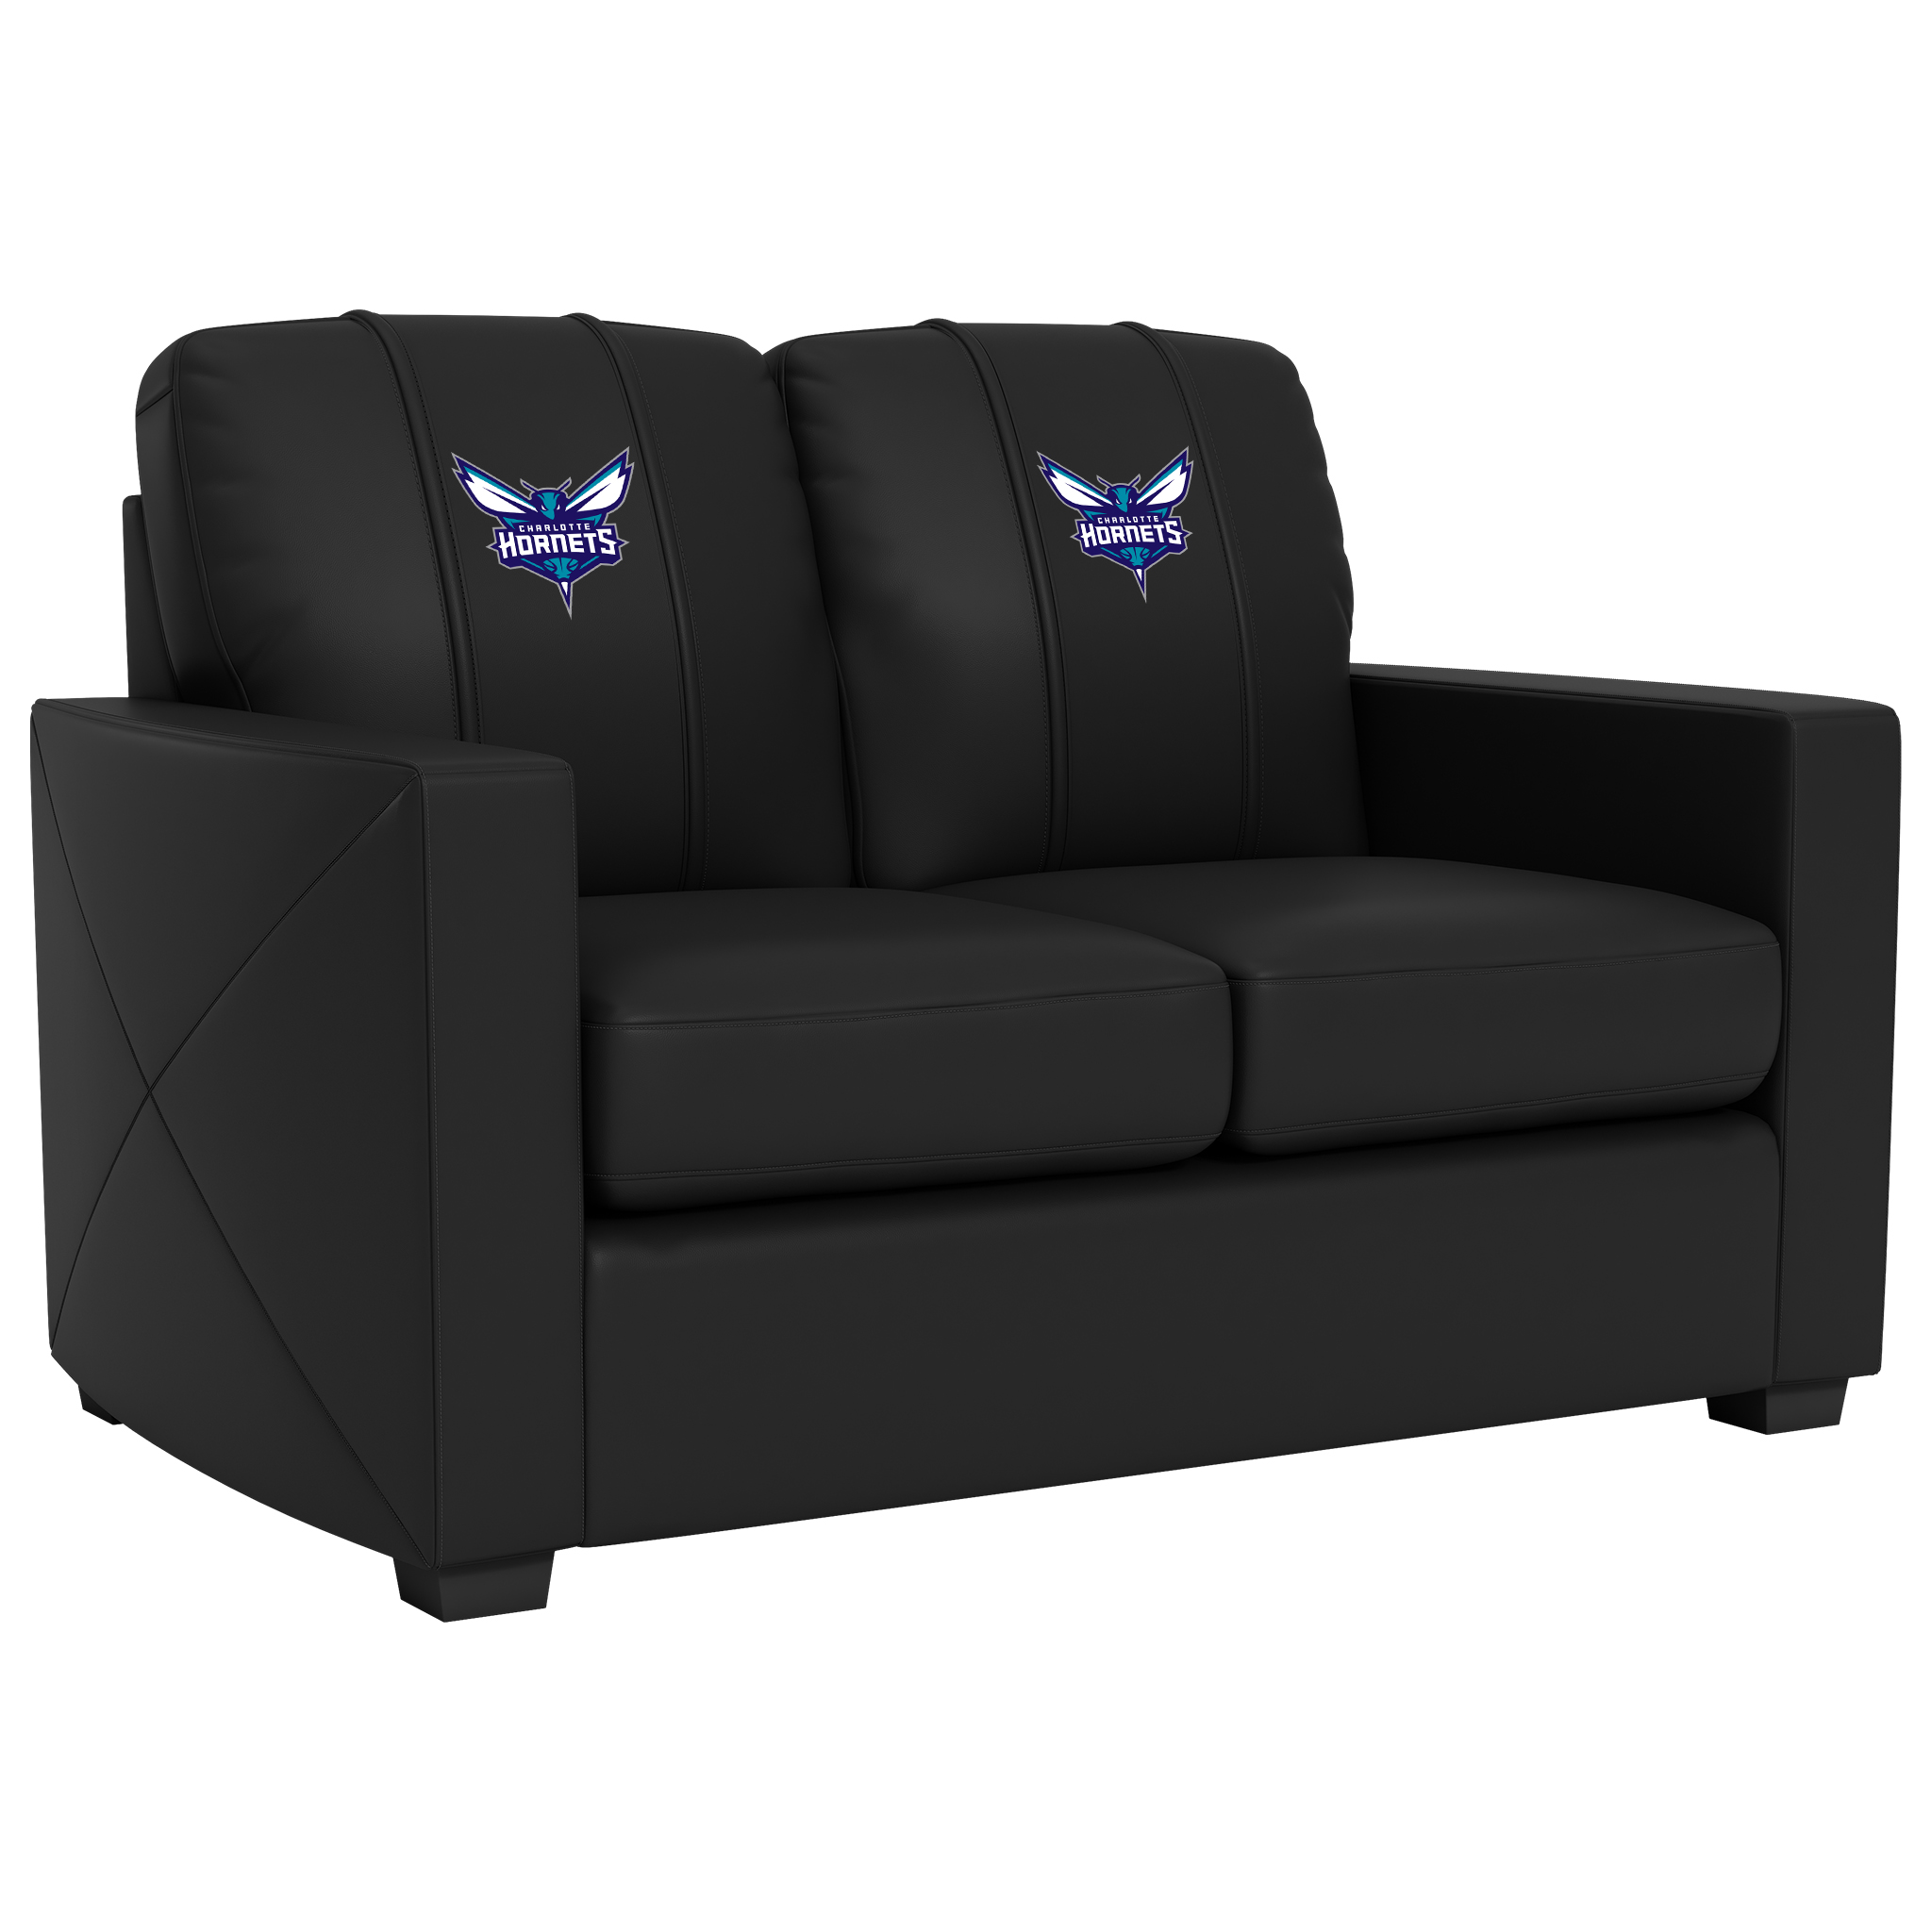 Charlotte Hornets Silver Loveseat with Charlotte Hornets Primary